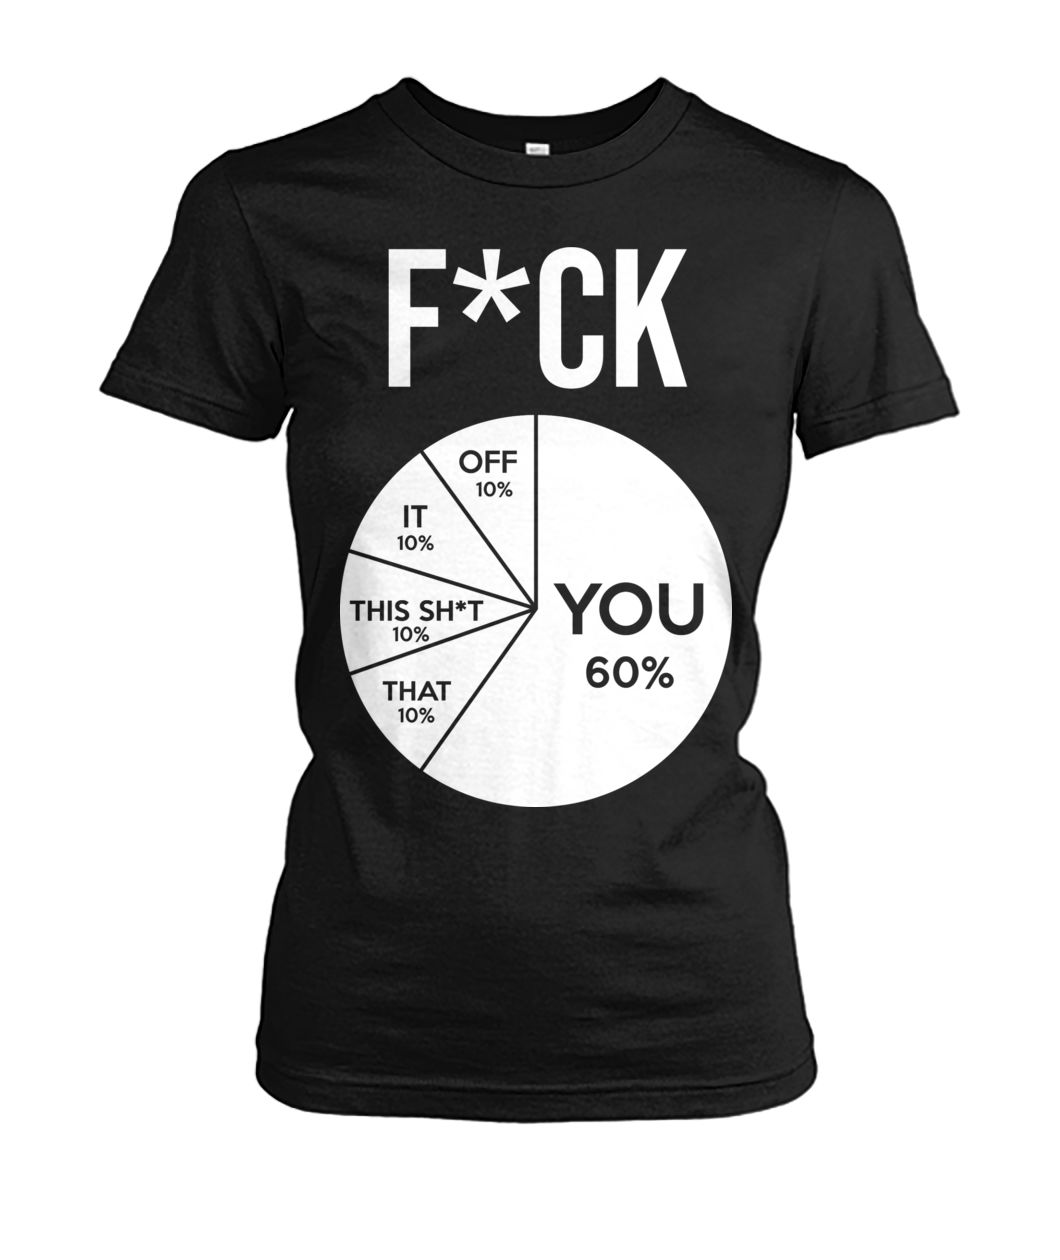 Fuck pie chart you 60% off 10% it 10% this shit 10% that 10% women's crew tee